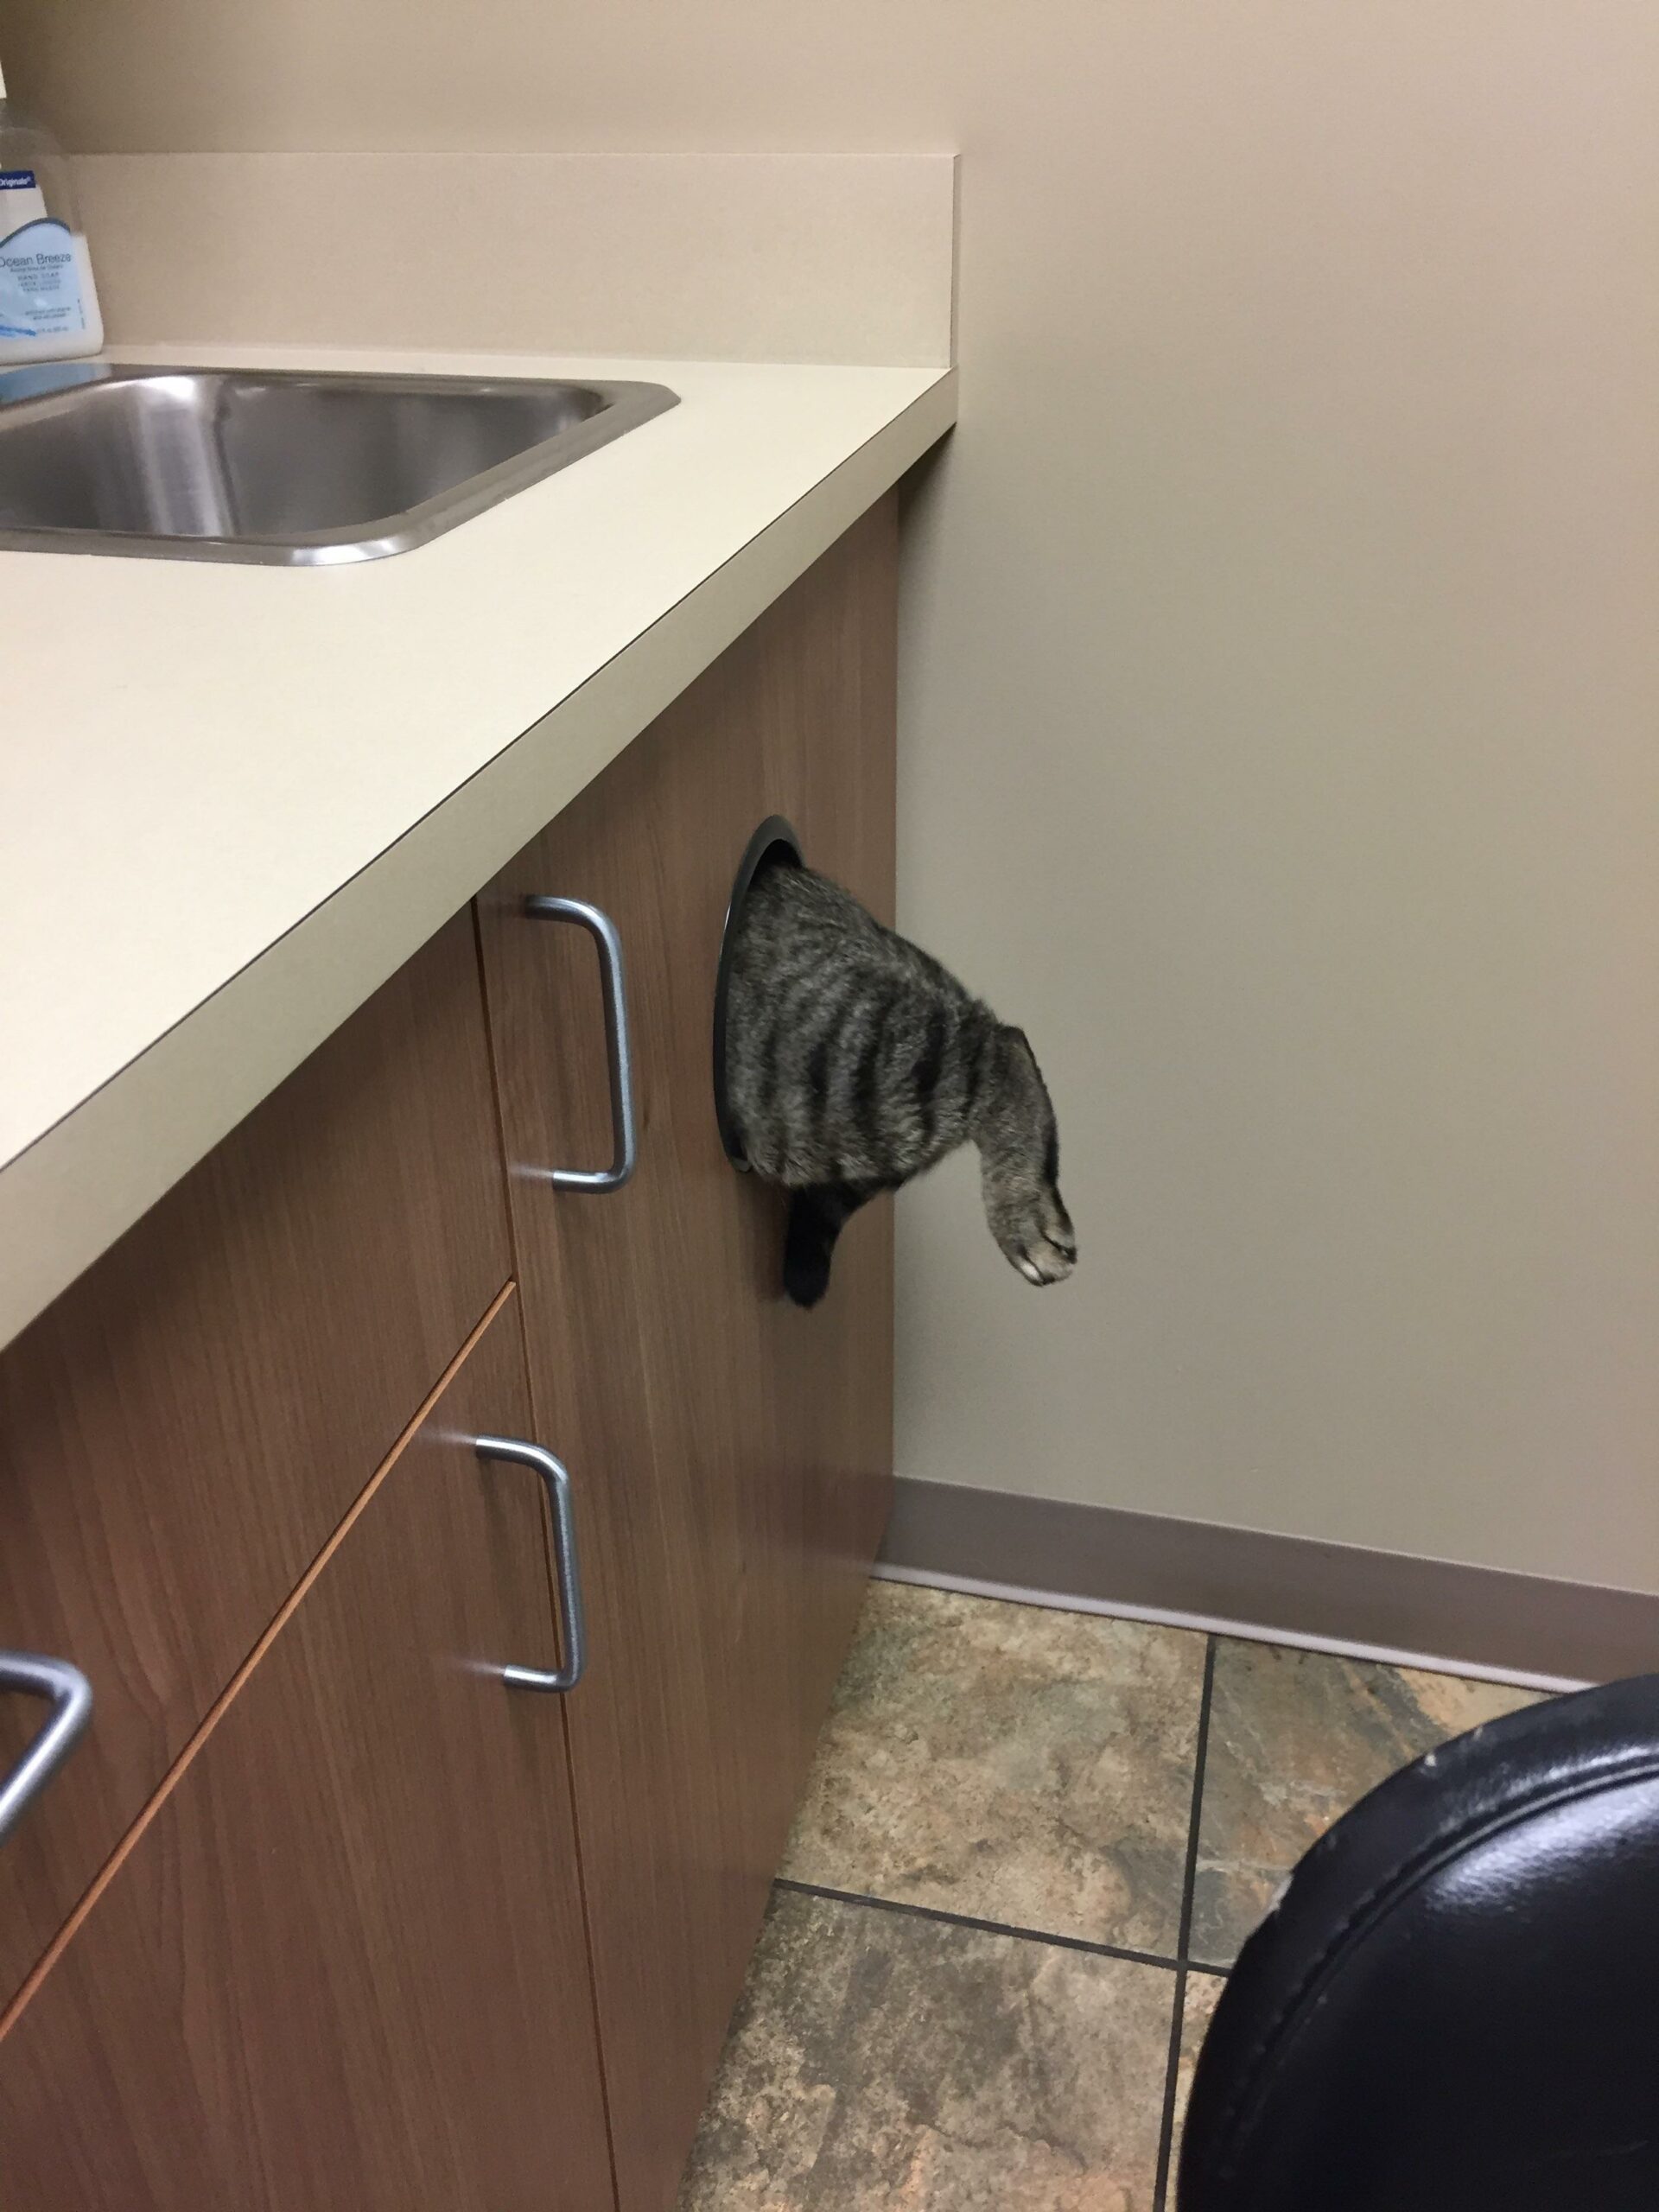 cat trying to escape vet's office through trash bin